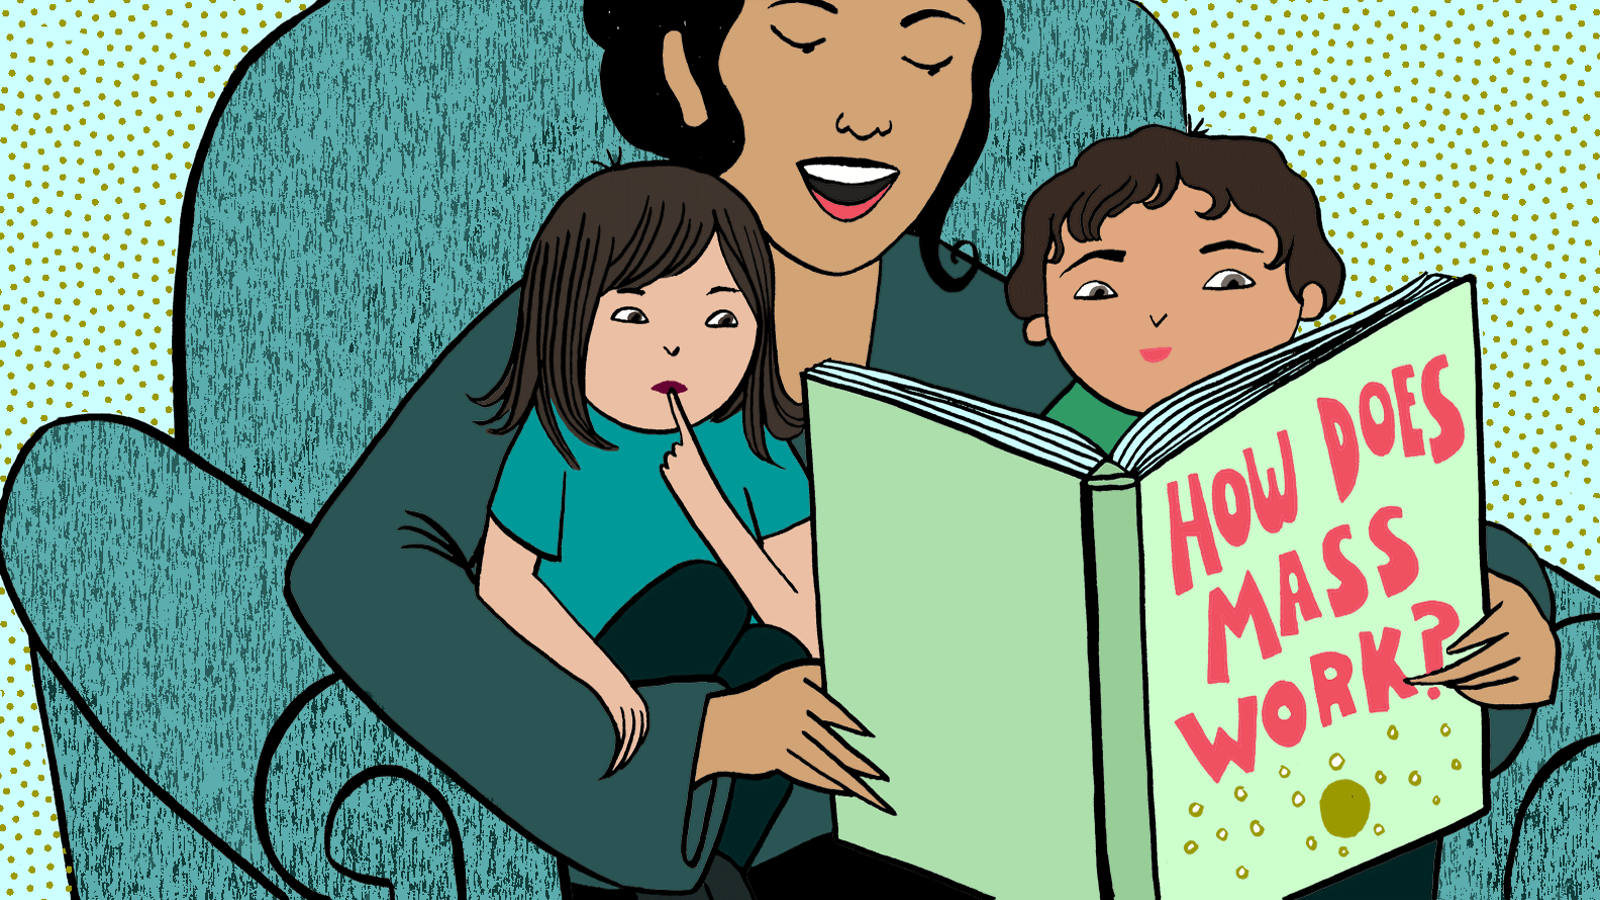 Illustration of mom reading two her two kids sitting on chair book says "where does mass come from?"